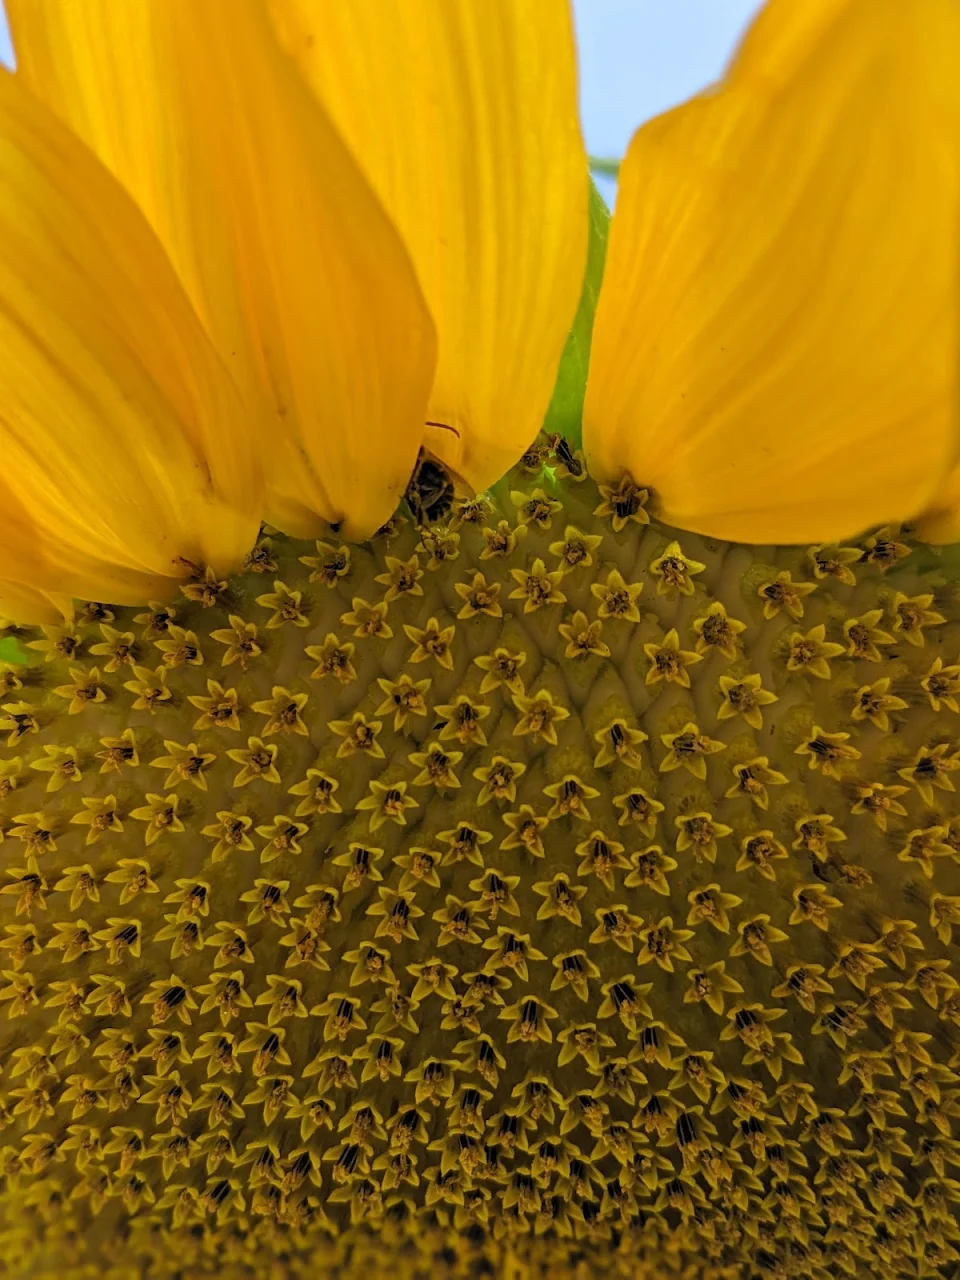 I took a picture of a bee butt inside one of my sunflowers